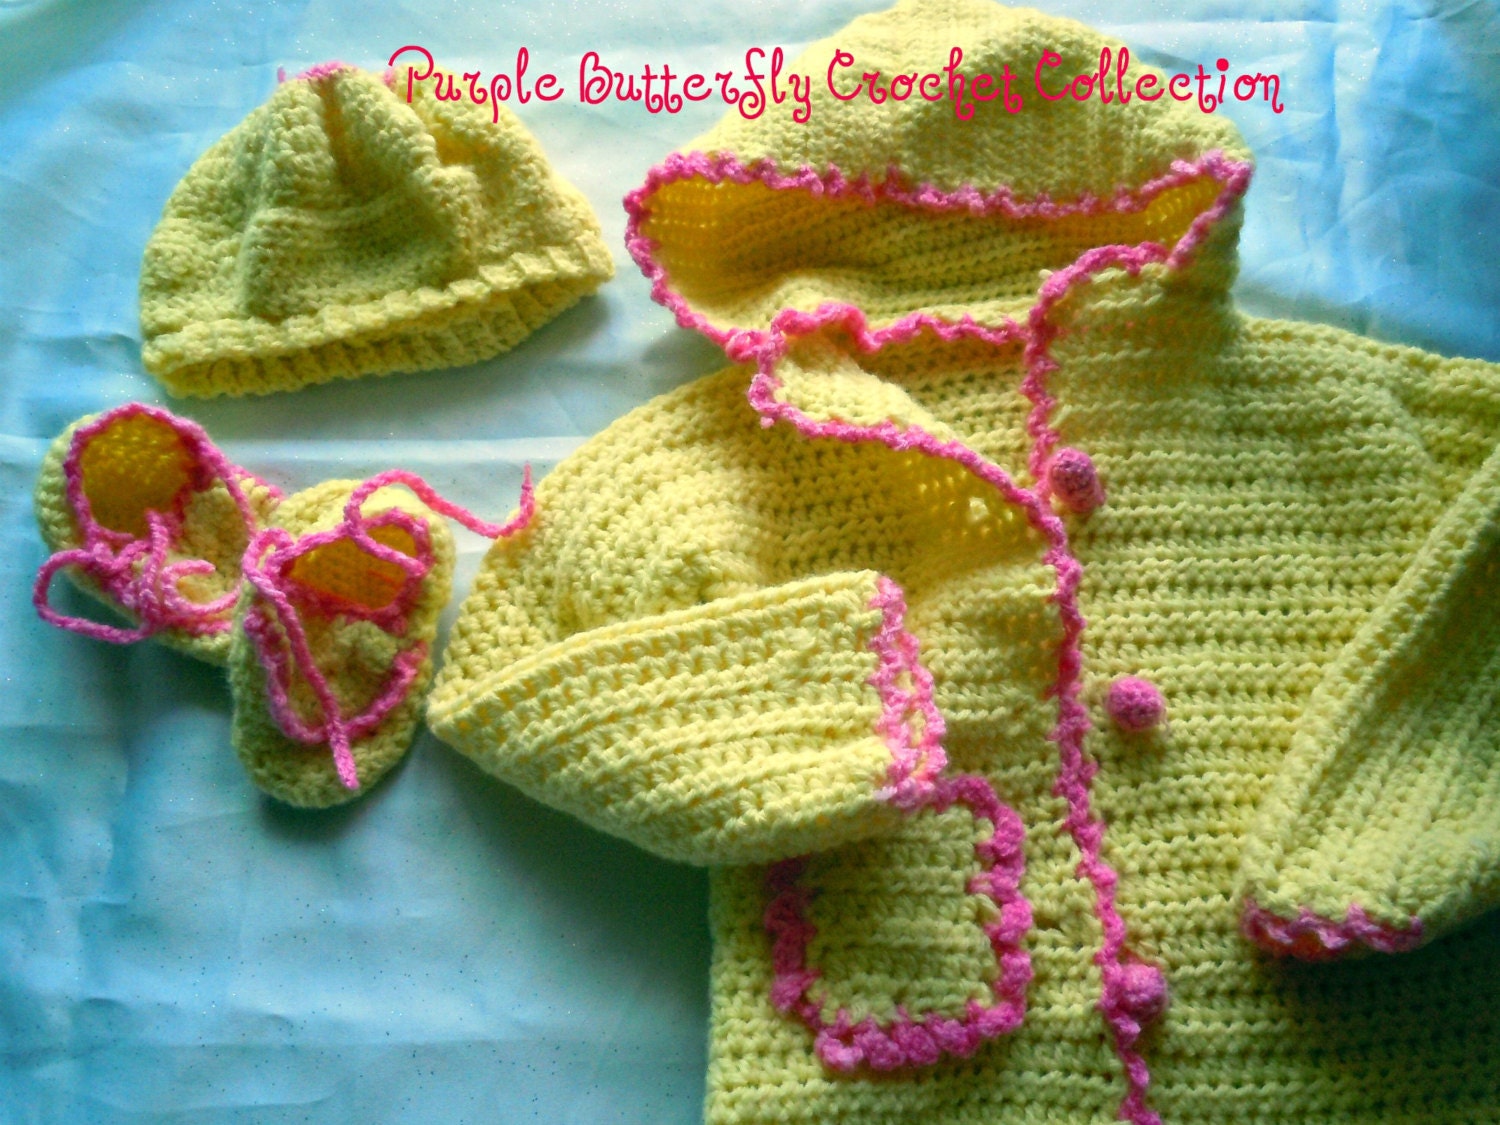 Crocheted Hooded Baby sweater, beret and bootee set